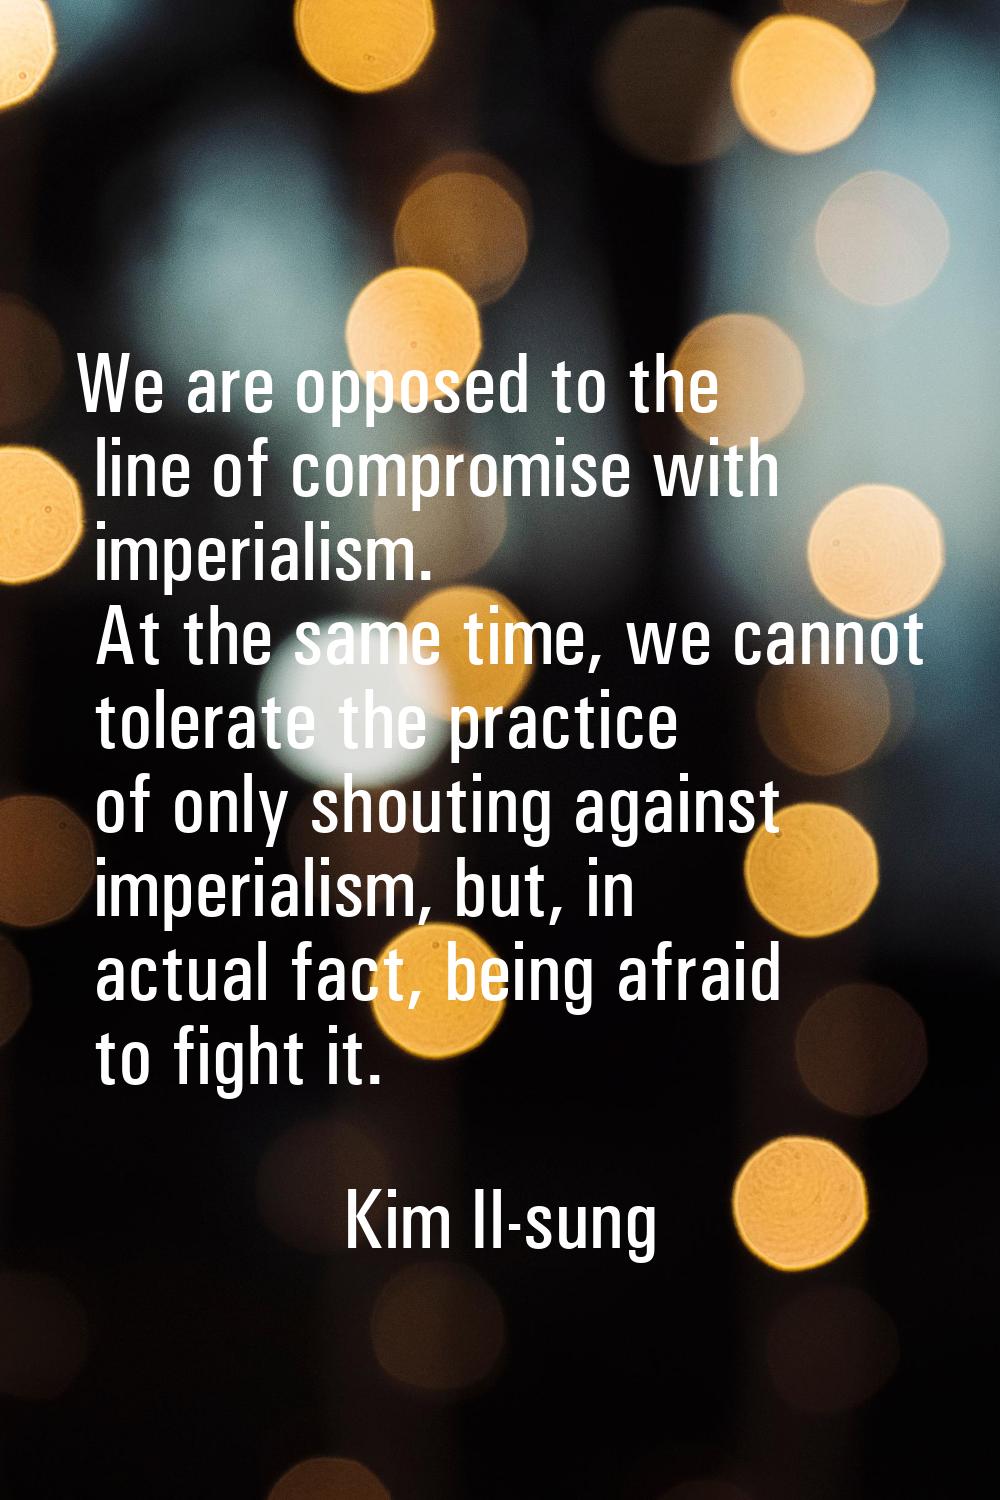 We are opposed to the line of compromise with imperialism. At the same time, we cannot tolerate the